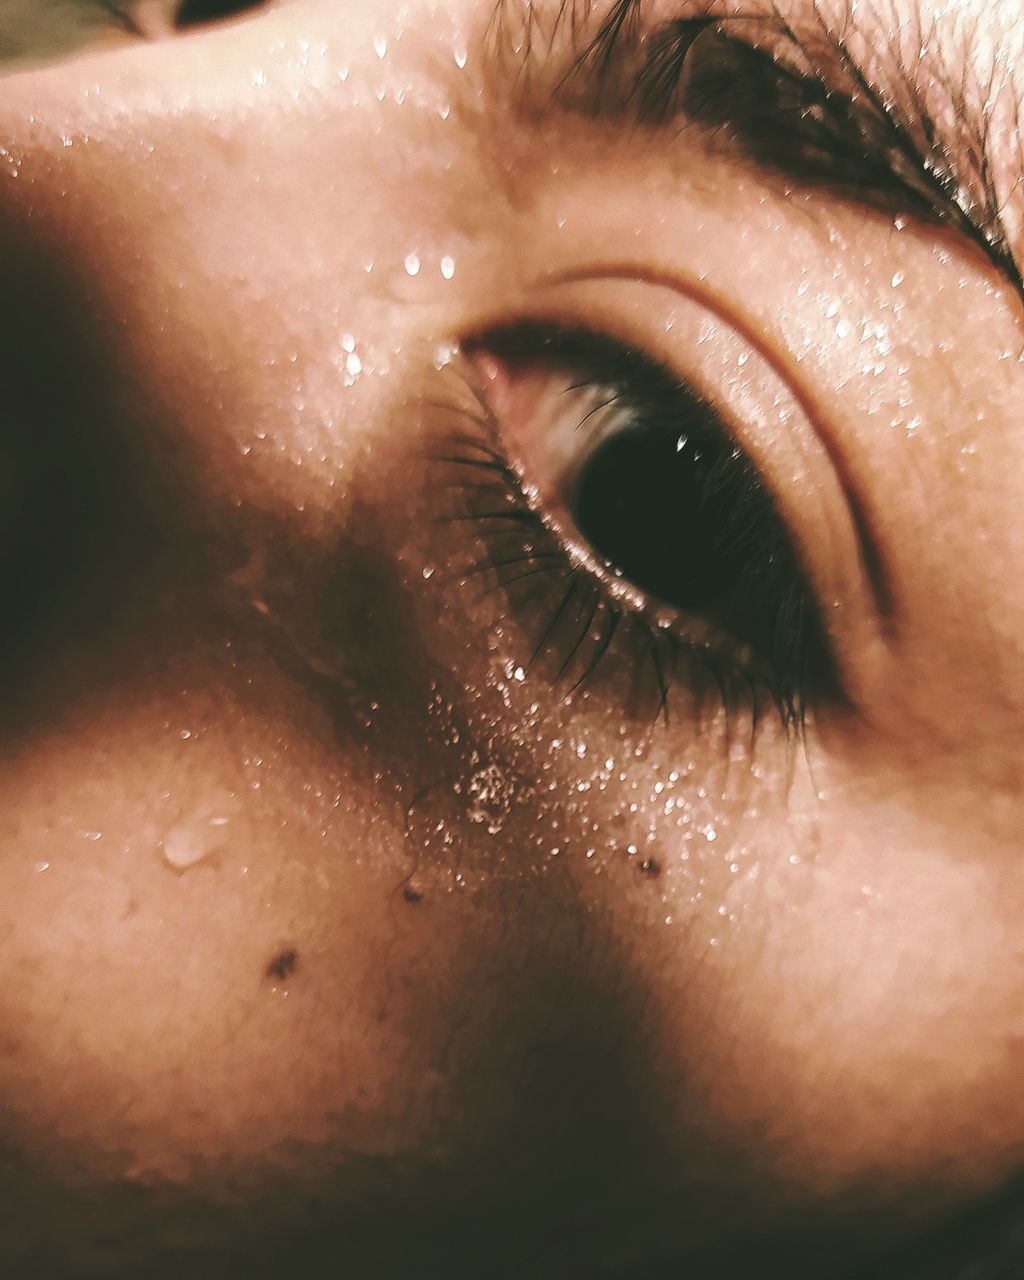 EXTREME CLOSE-UP OF WOMAN EYE